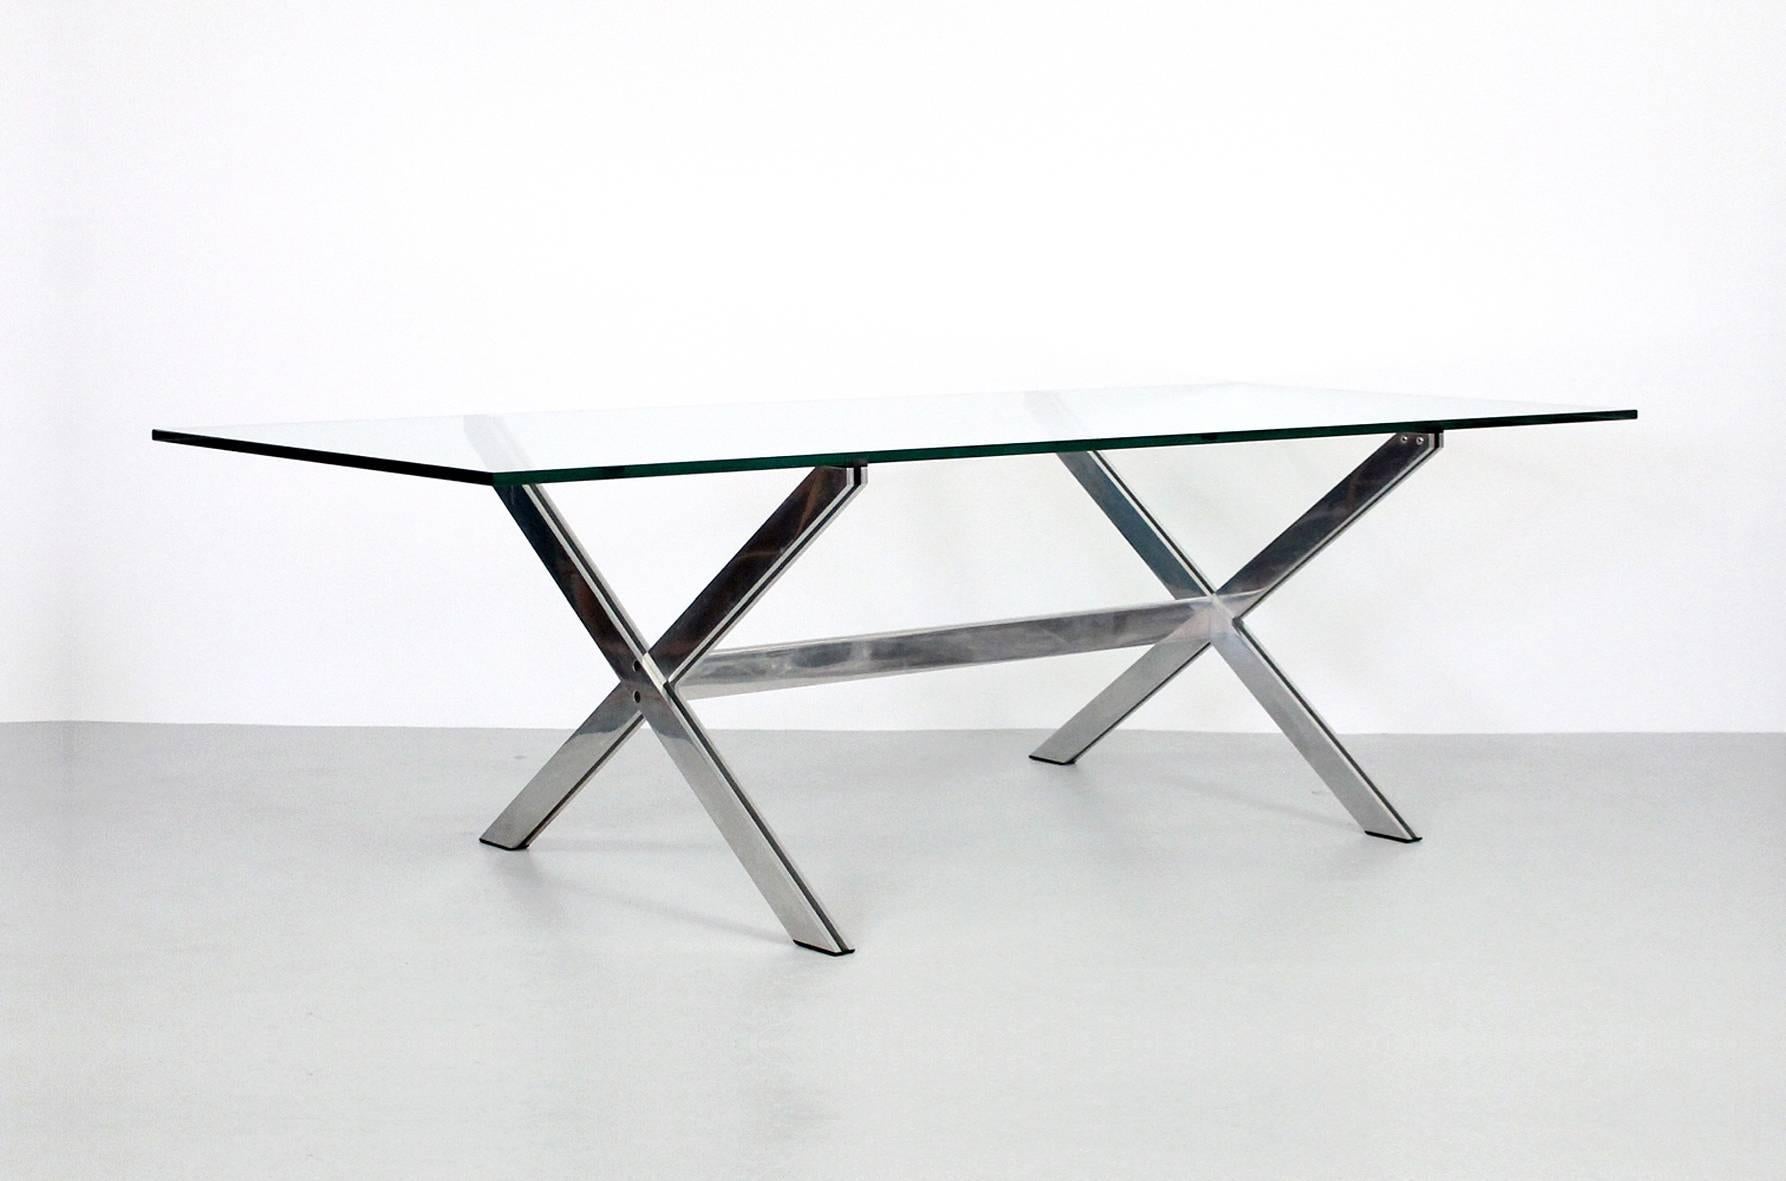 Large dining or conference table with polished aluminium X base and glass top designed by John Vesey. These pieces are expertly built with subtle architectural details that epitomize a chic 1970s aesthetic.